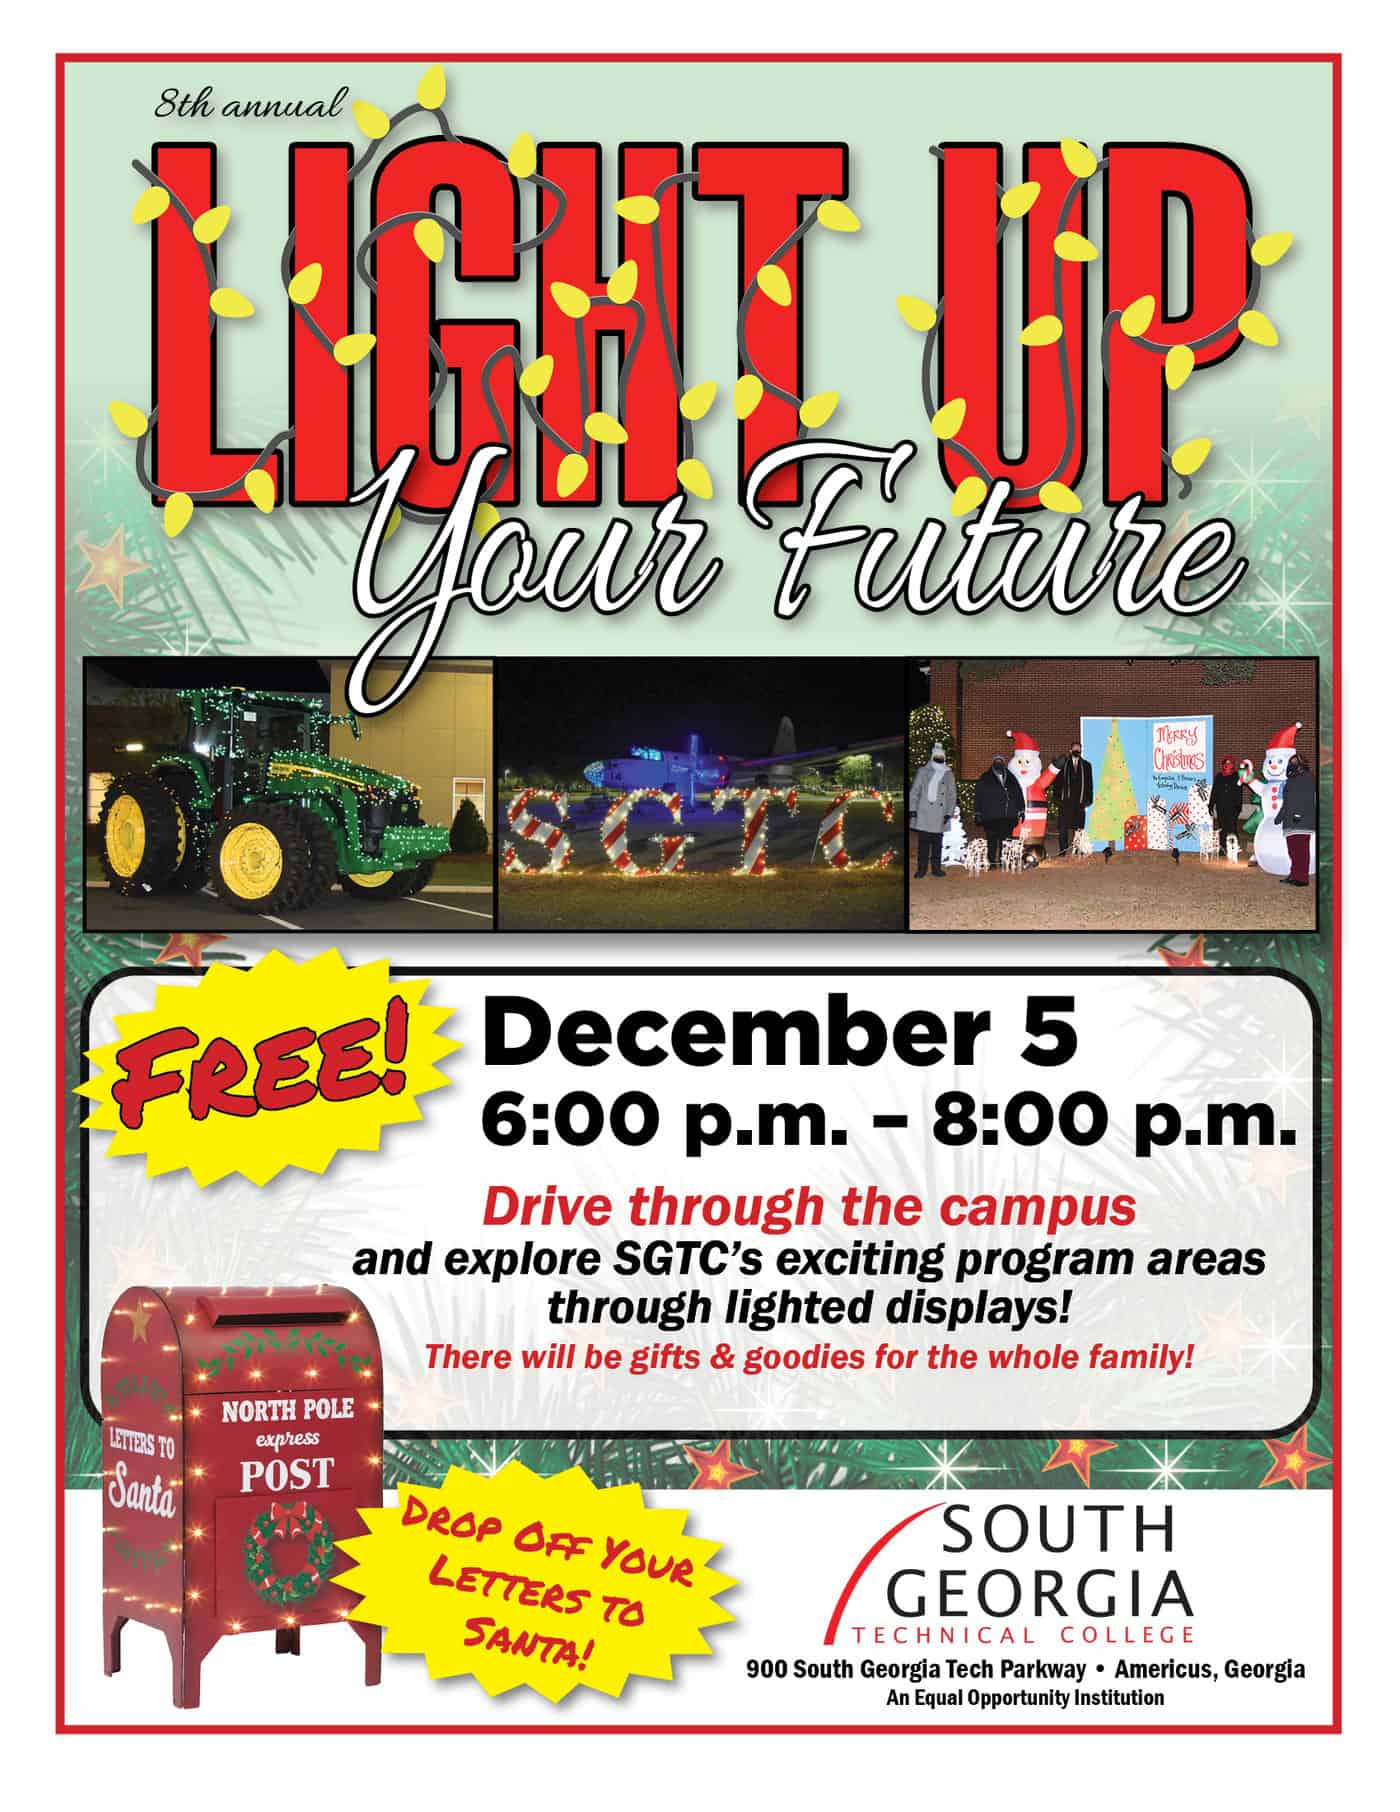 Everyone is invited to the FREE 8th annual “Light Up Your Future” Event at South Georgia Technical College on Tuesday, December 5th from 6 p.m. to 8 p.m.